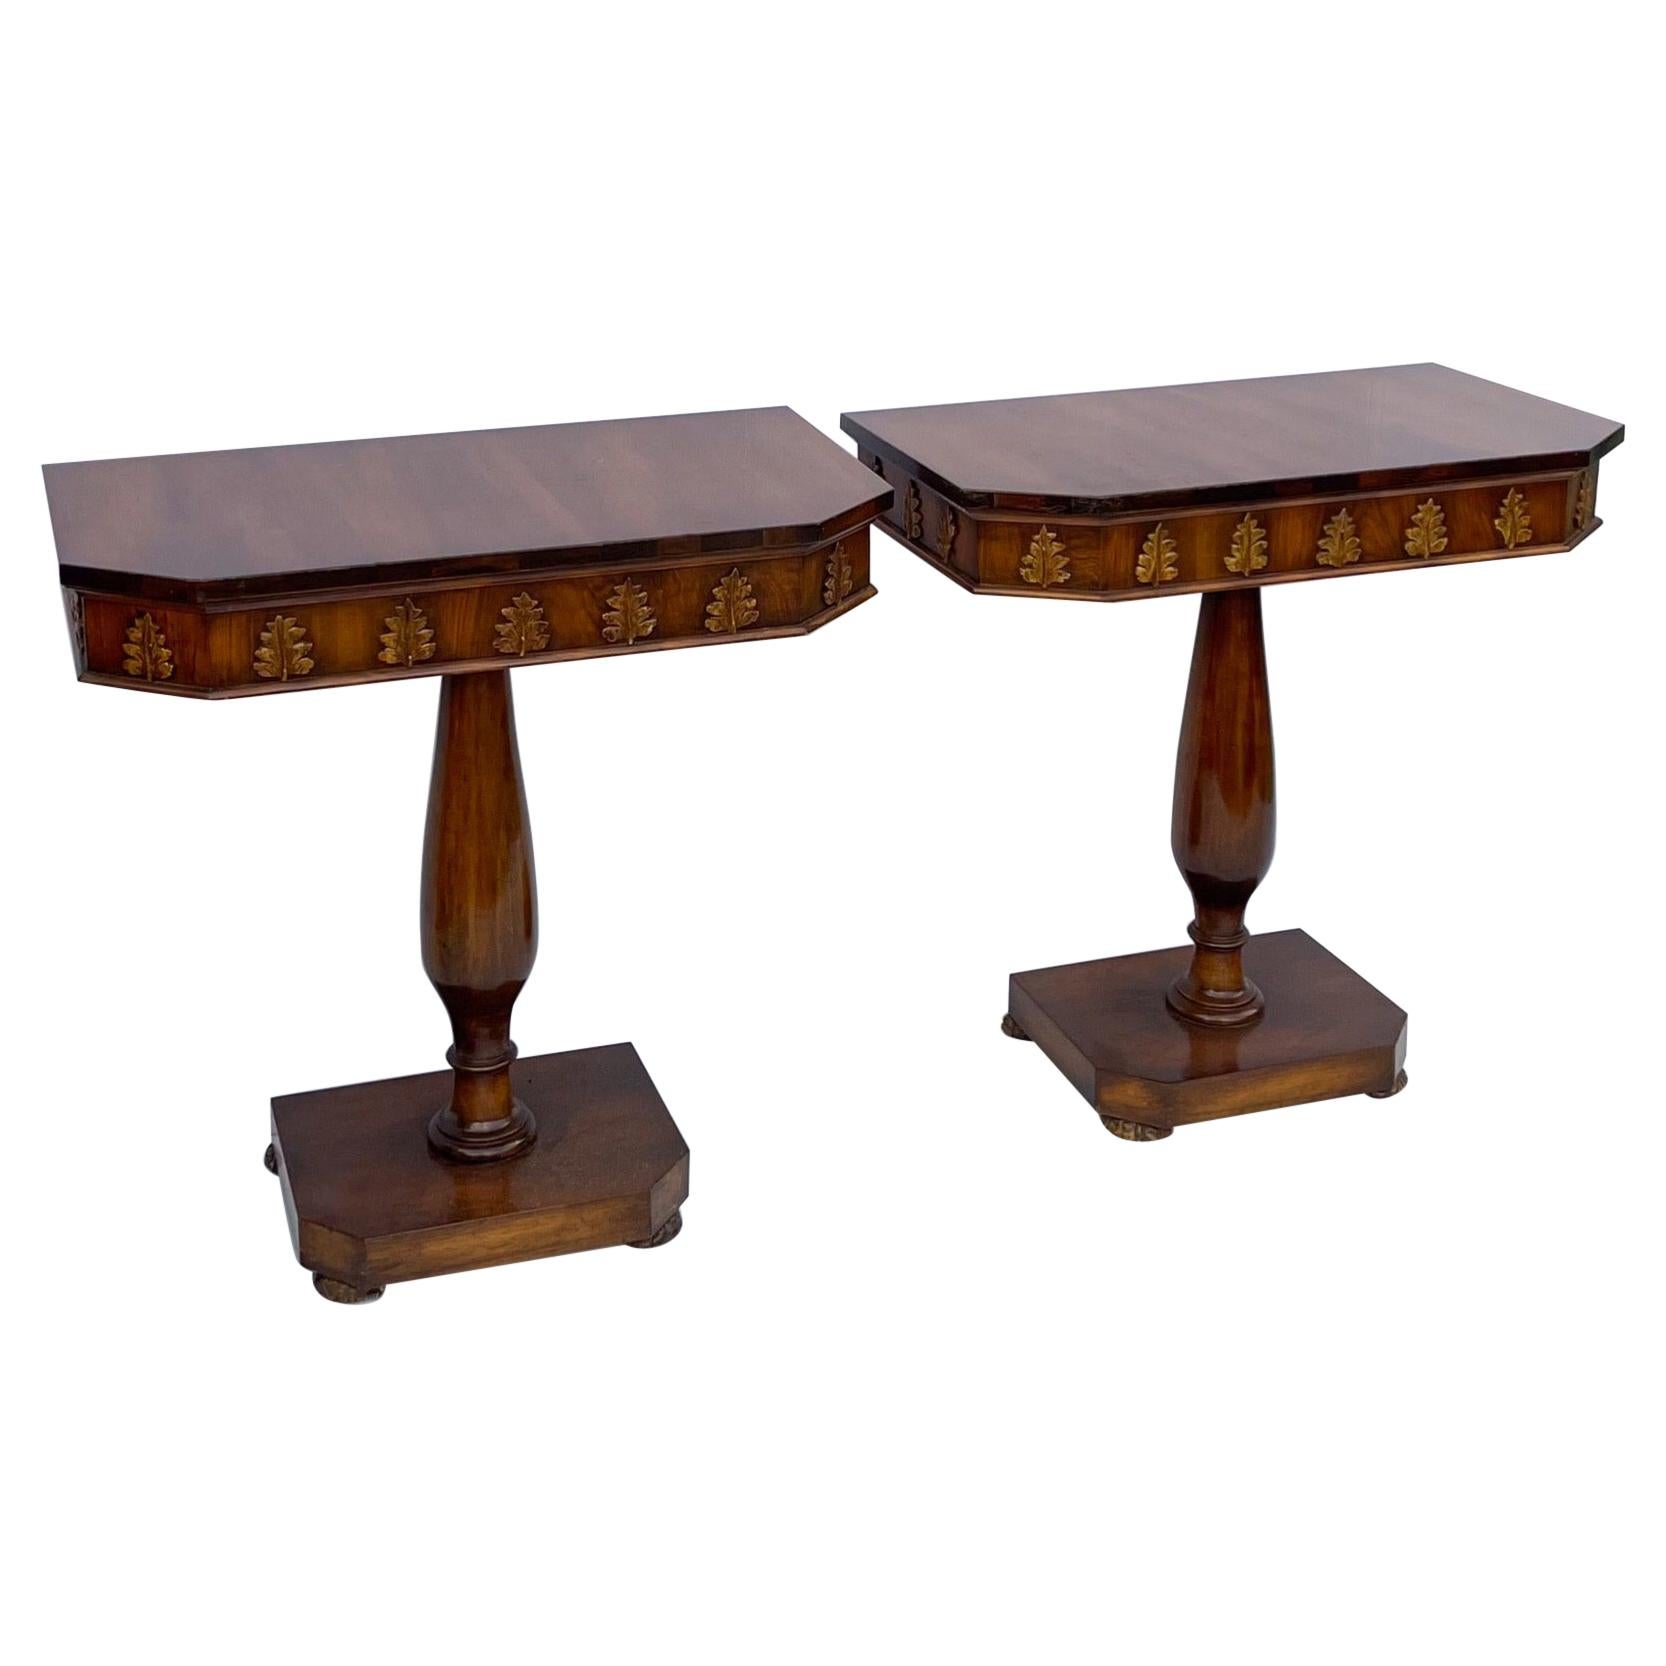 1940s Regency Style Carved Walnut and Gilt Console Tables, Pair For Sale